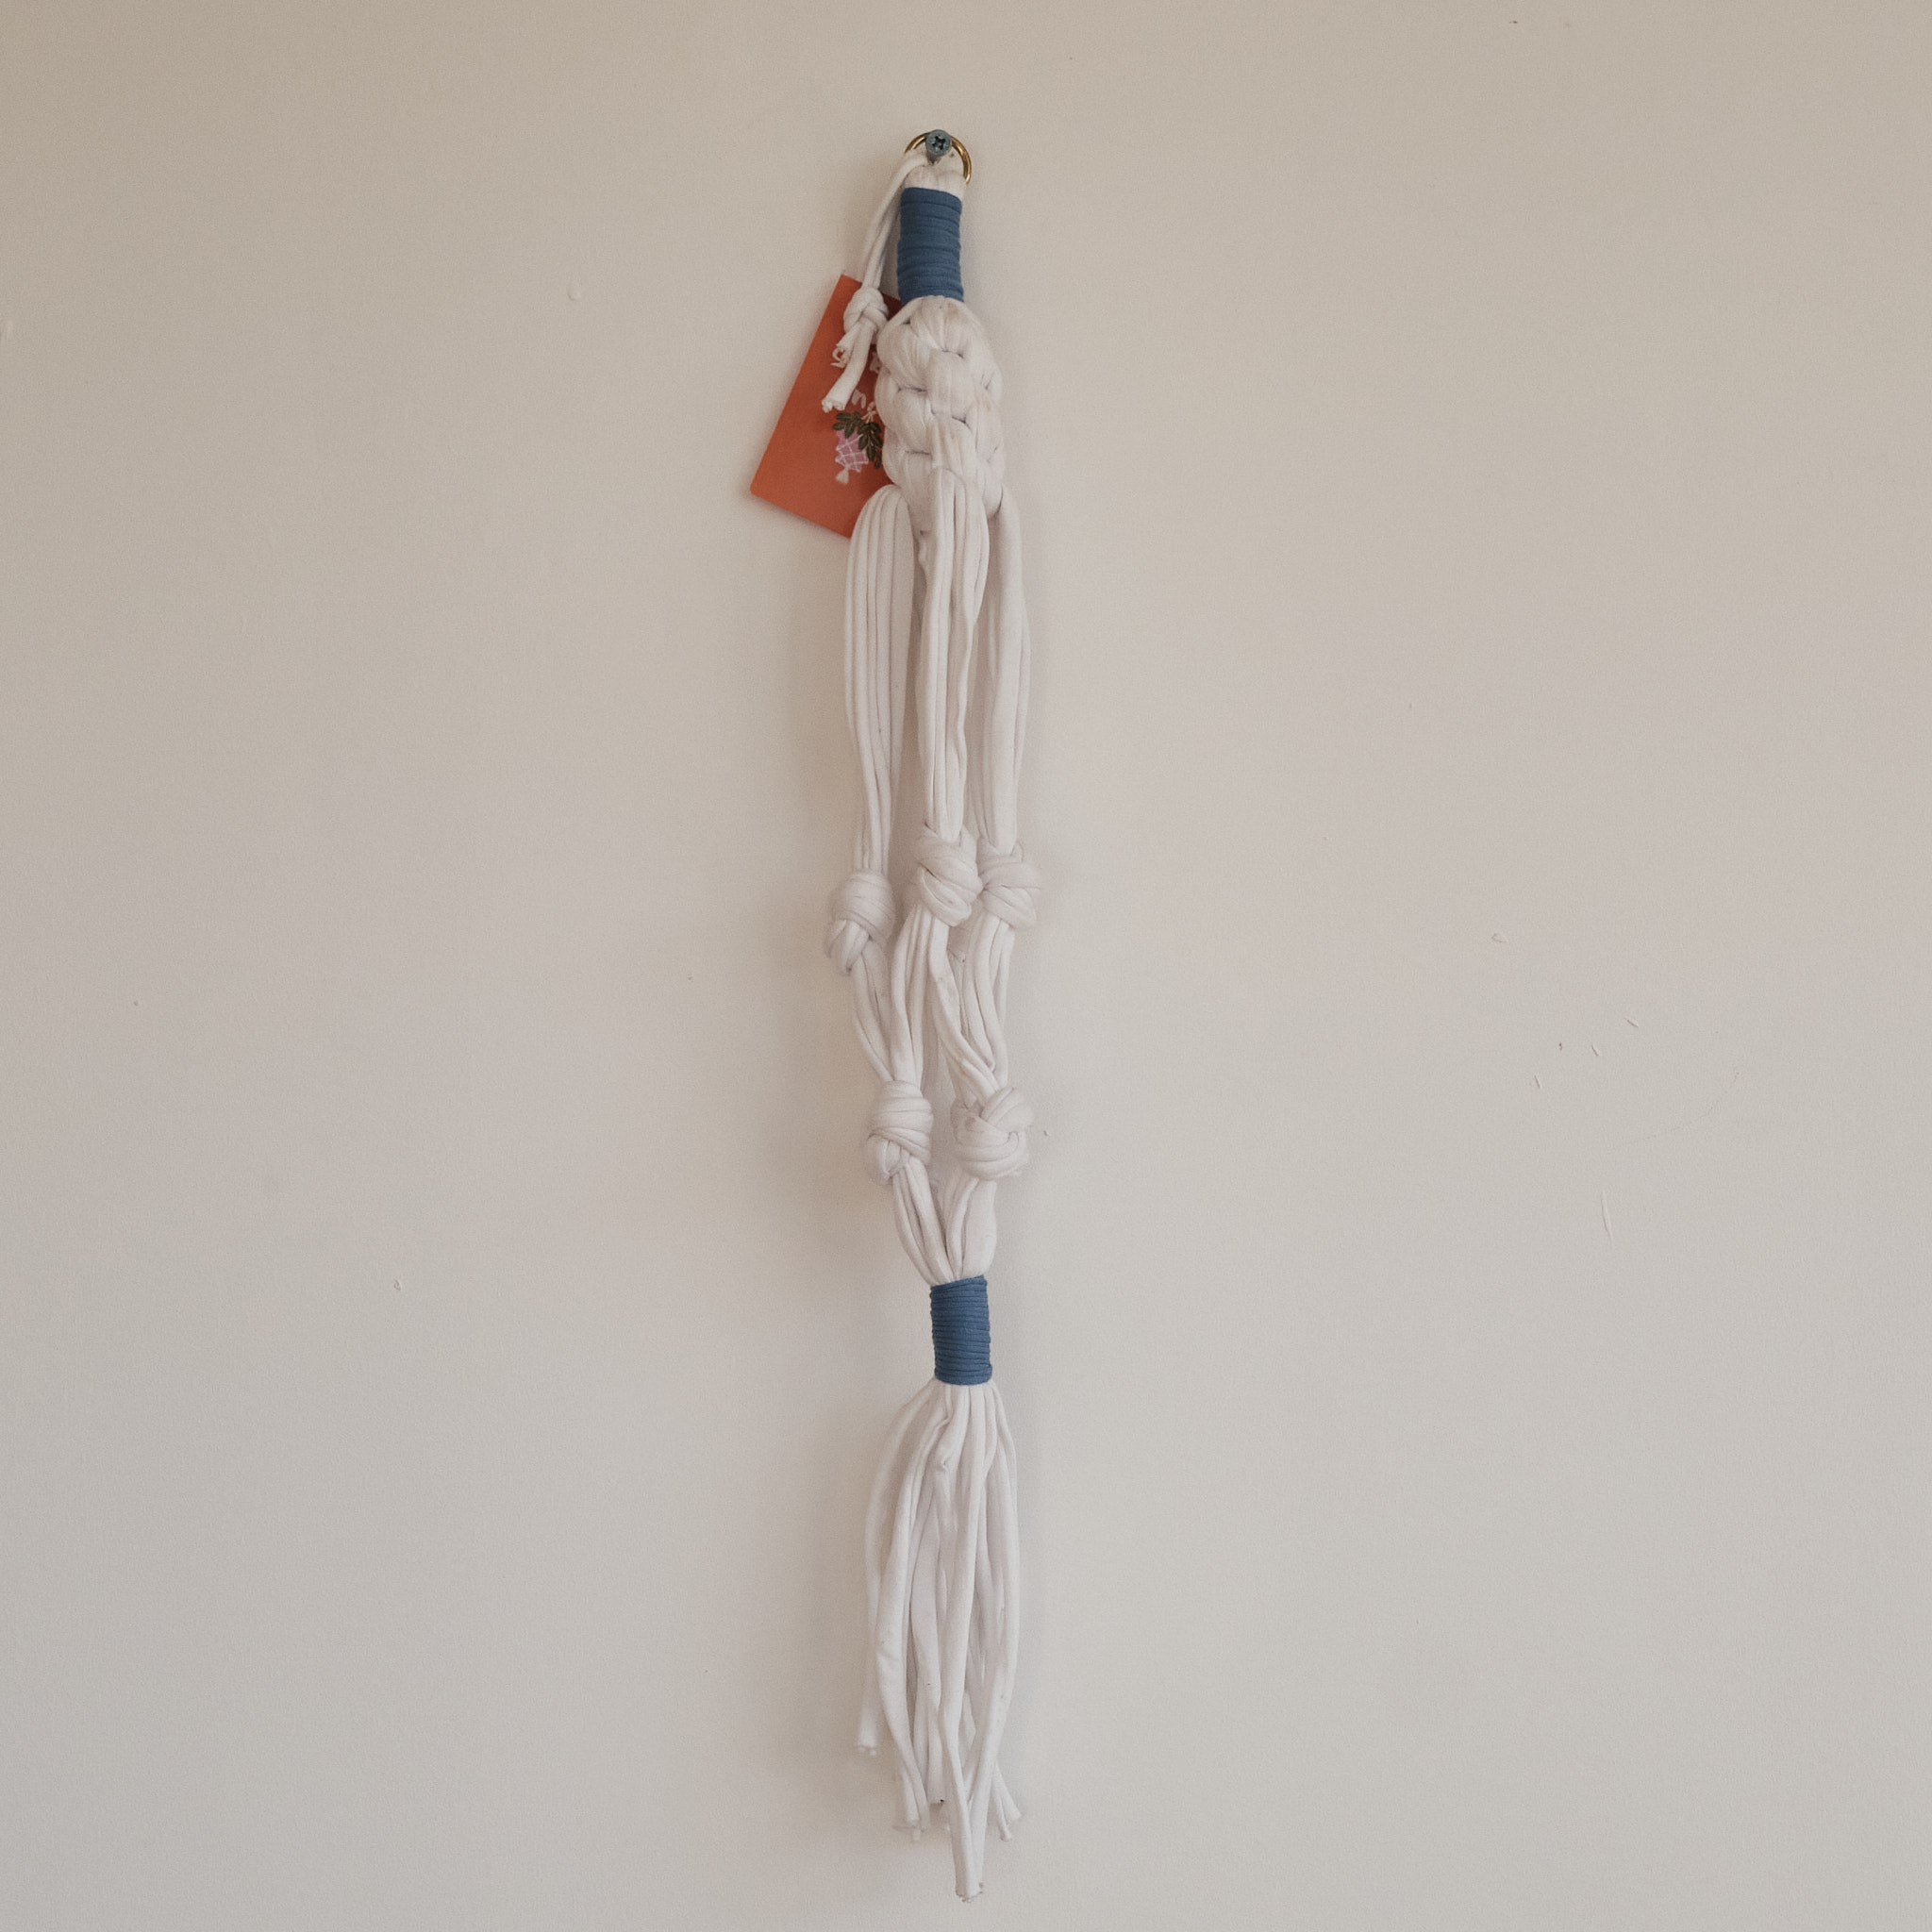 sarora-knots-recycled-cotton-plant-hanger-long-in-white-and-blue